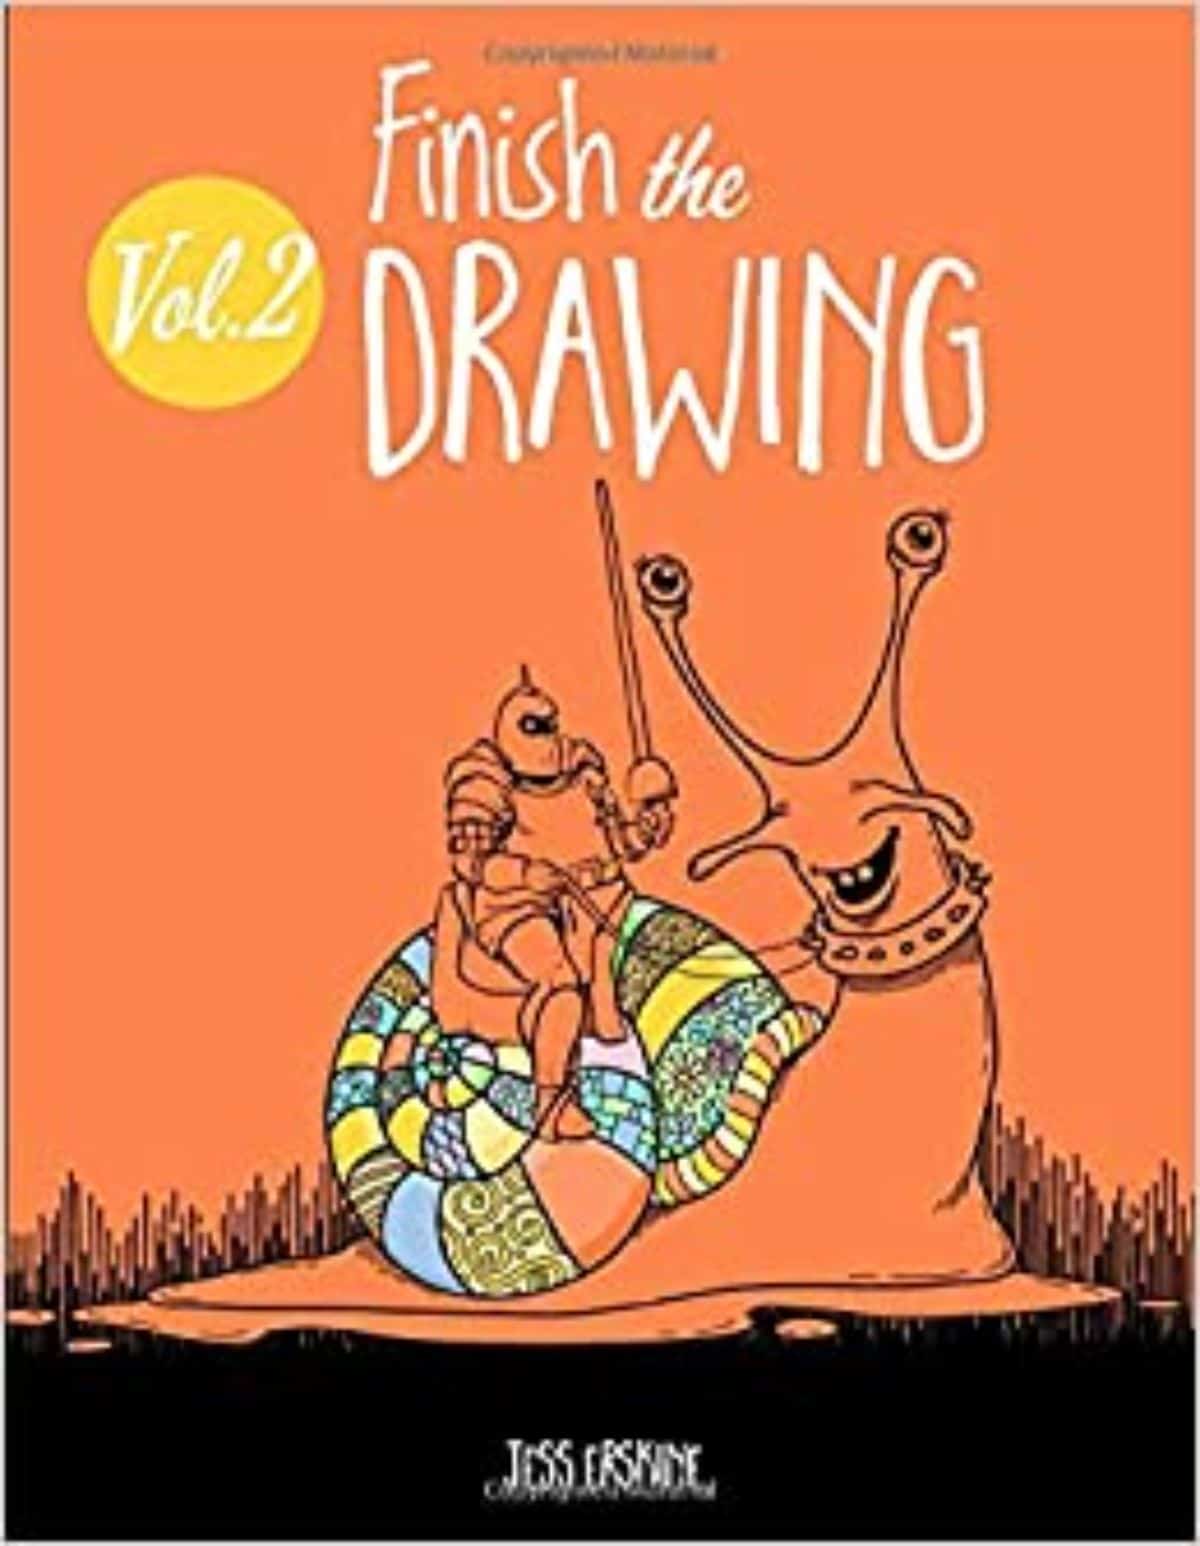 the cover of a book. An orange background with the text "Finish the Drawing: Vol. 2" at the top. A knight is riding a snail with a colored shell